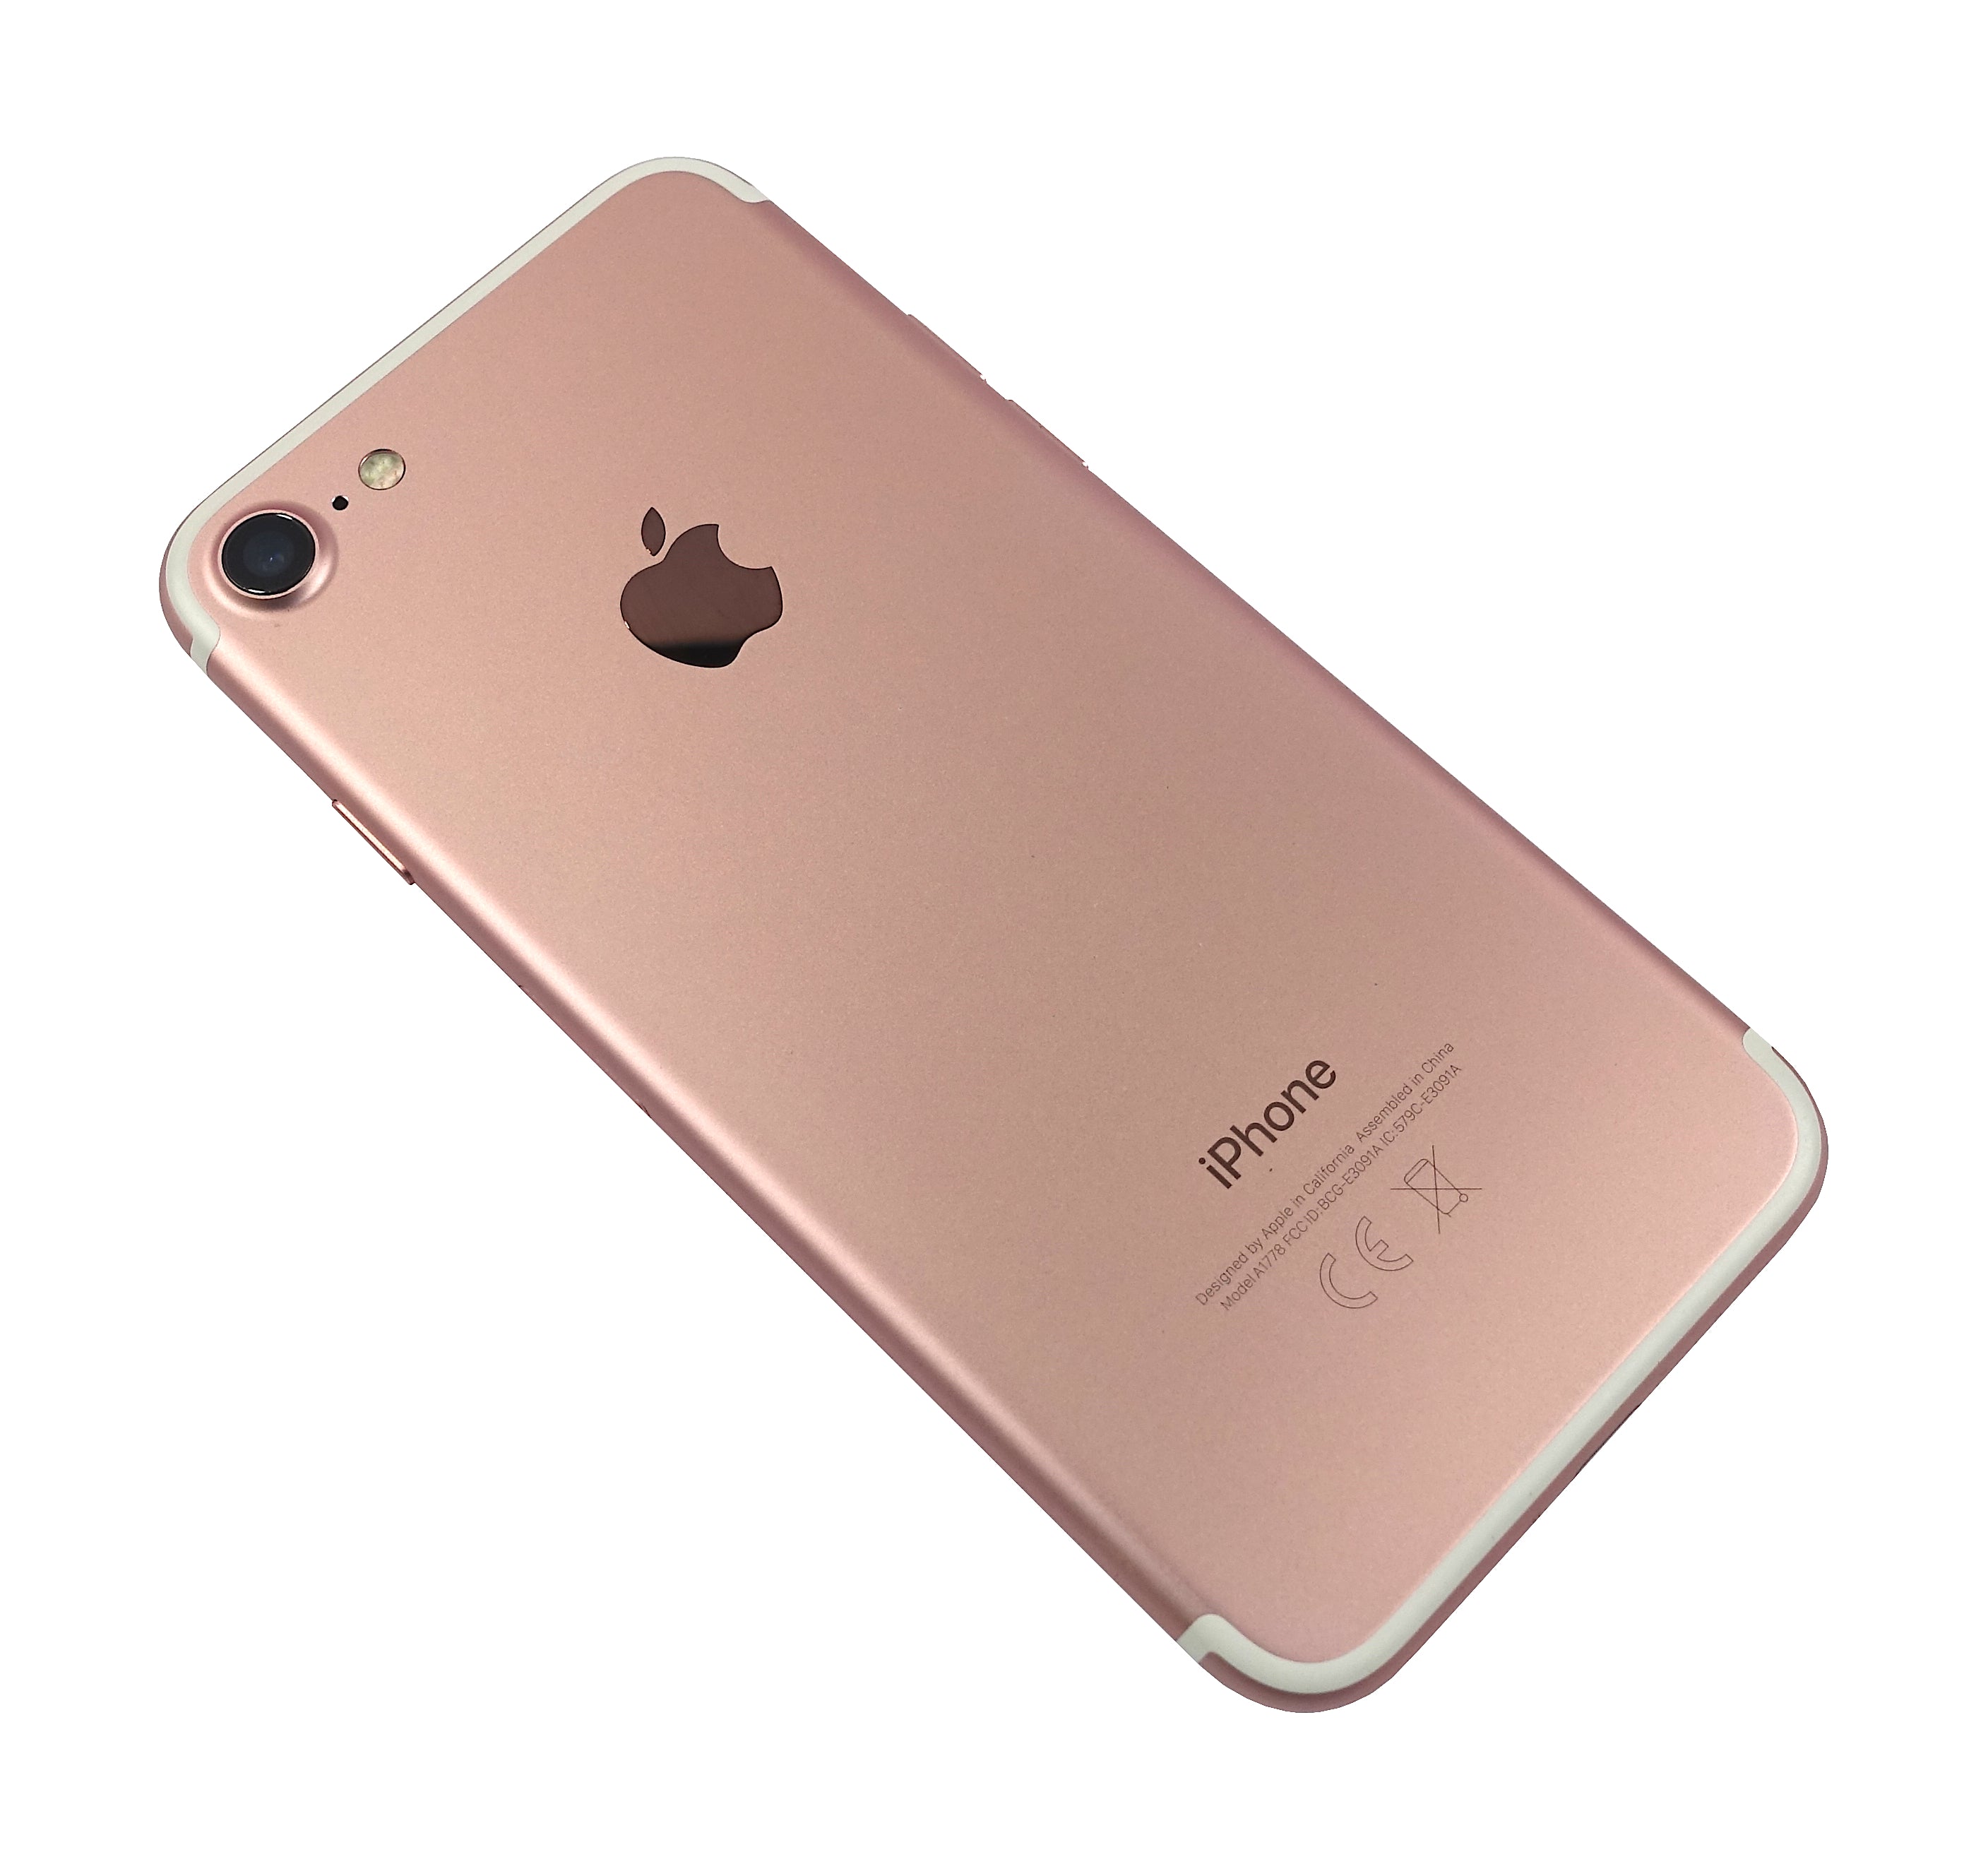 Apple iPhone 7 Smartphone, 32GB, Network Unlocked, A1778, Rose Gold